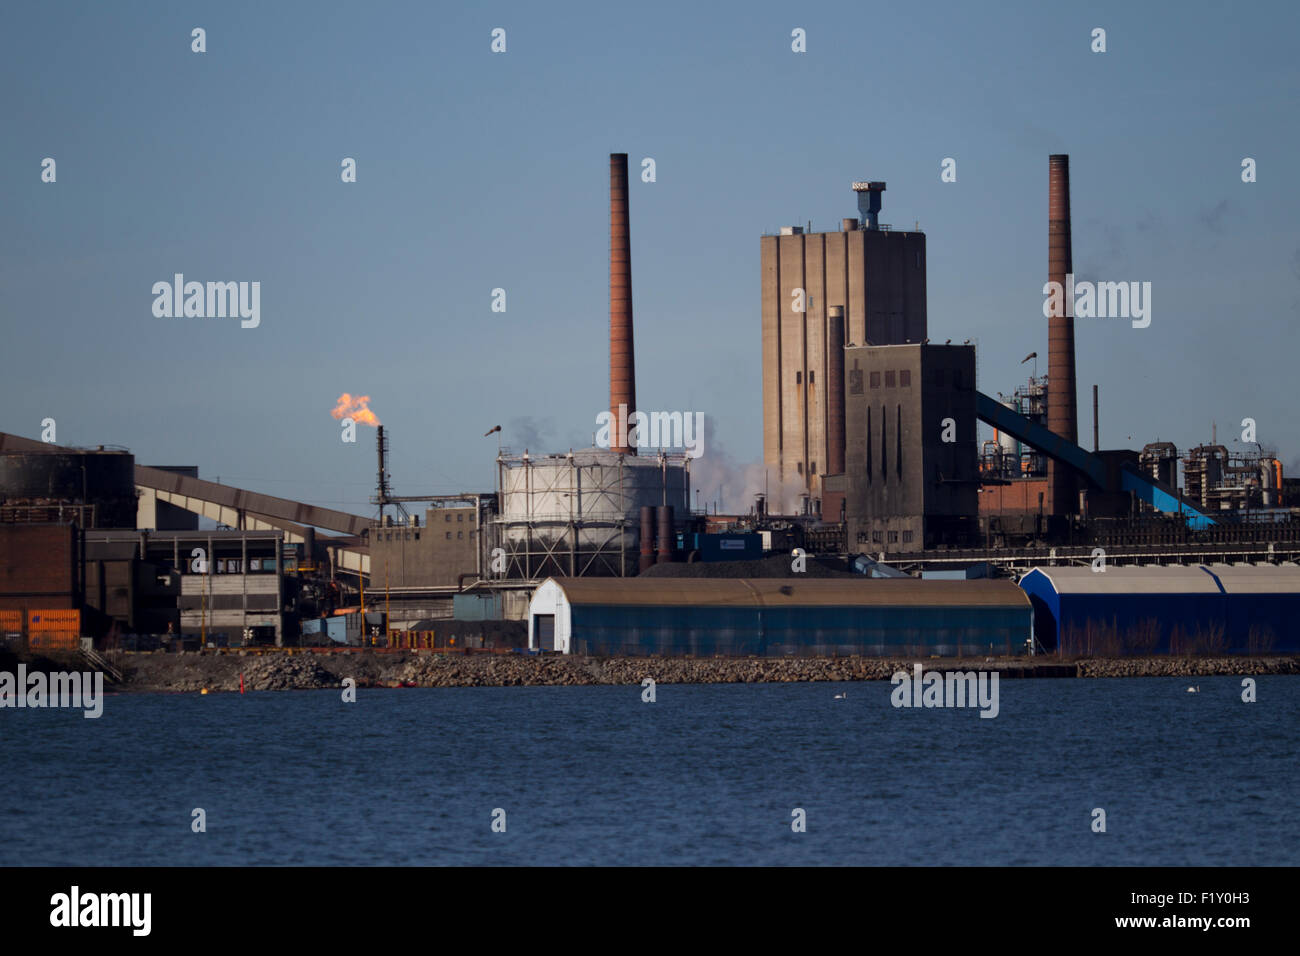 View of a Swedish steel mills with smoking chimneys Stock Photo